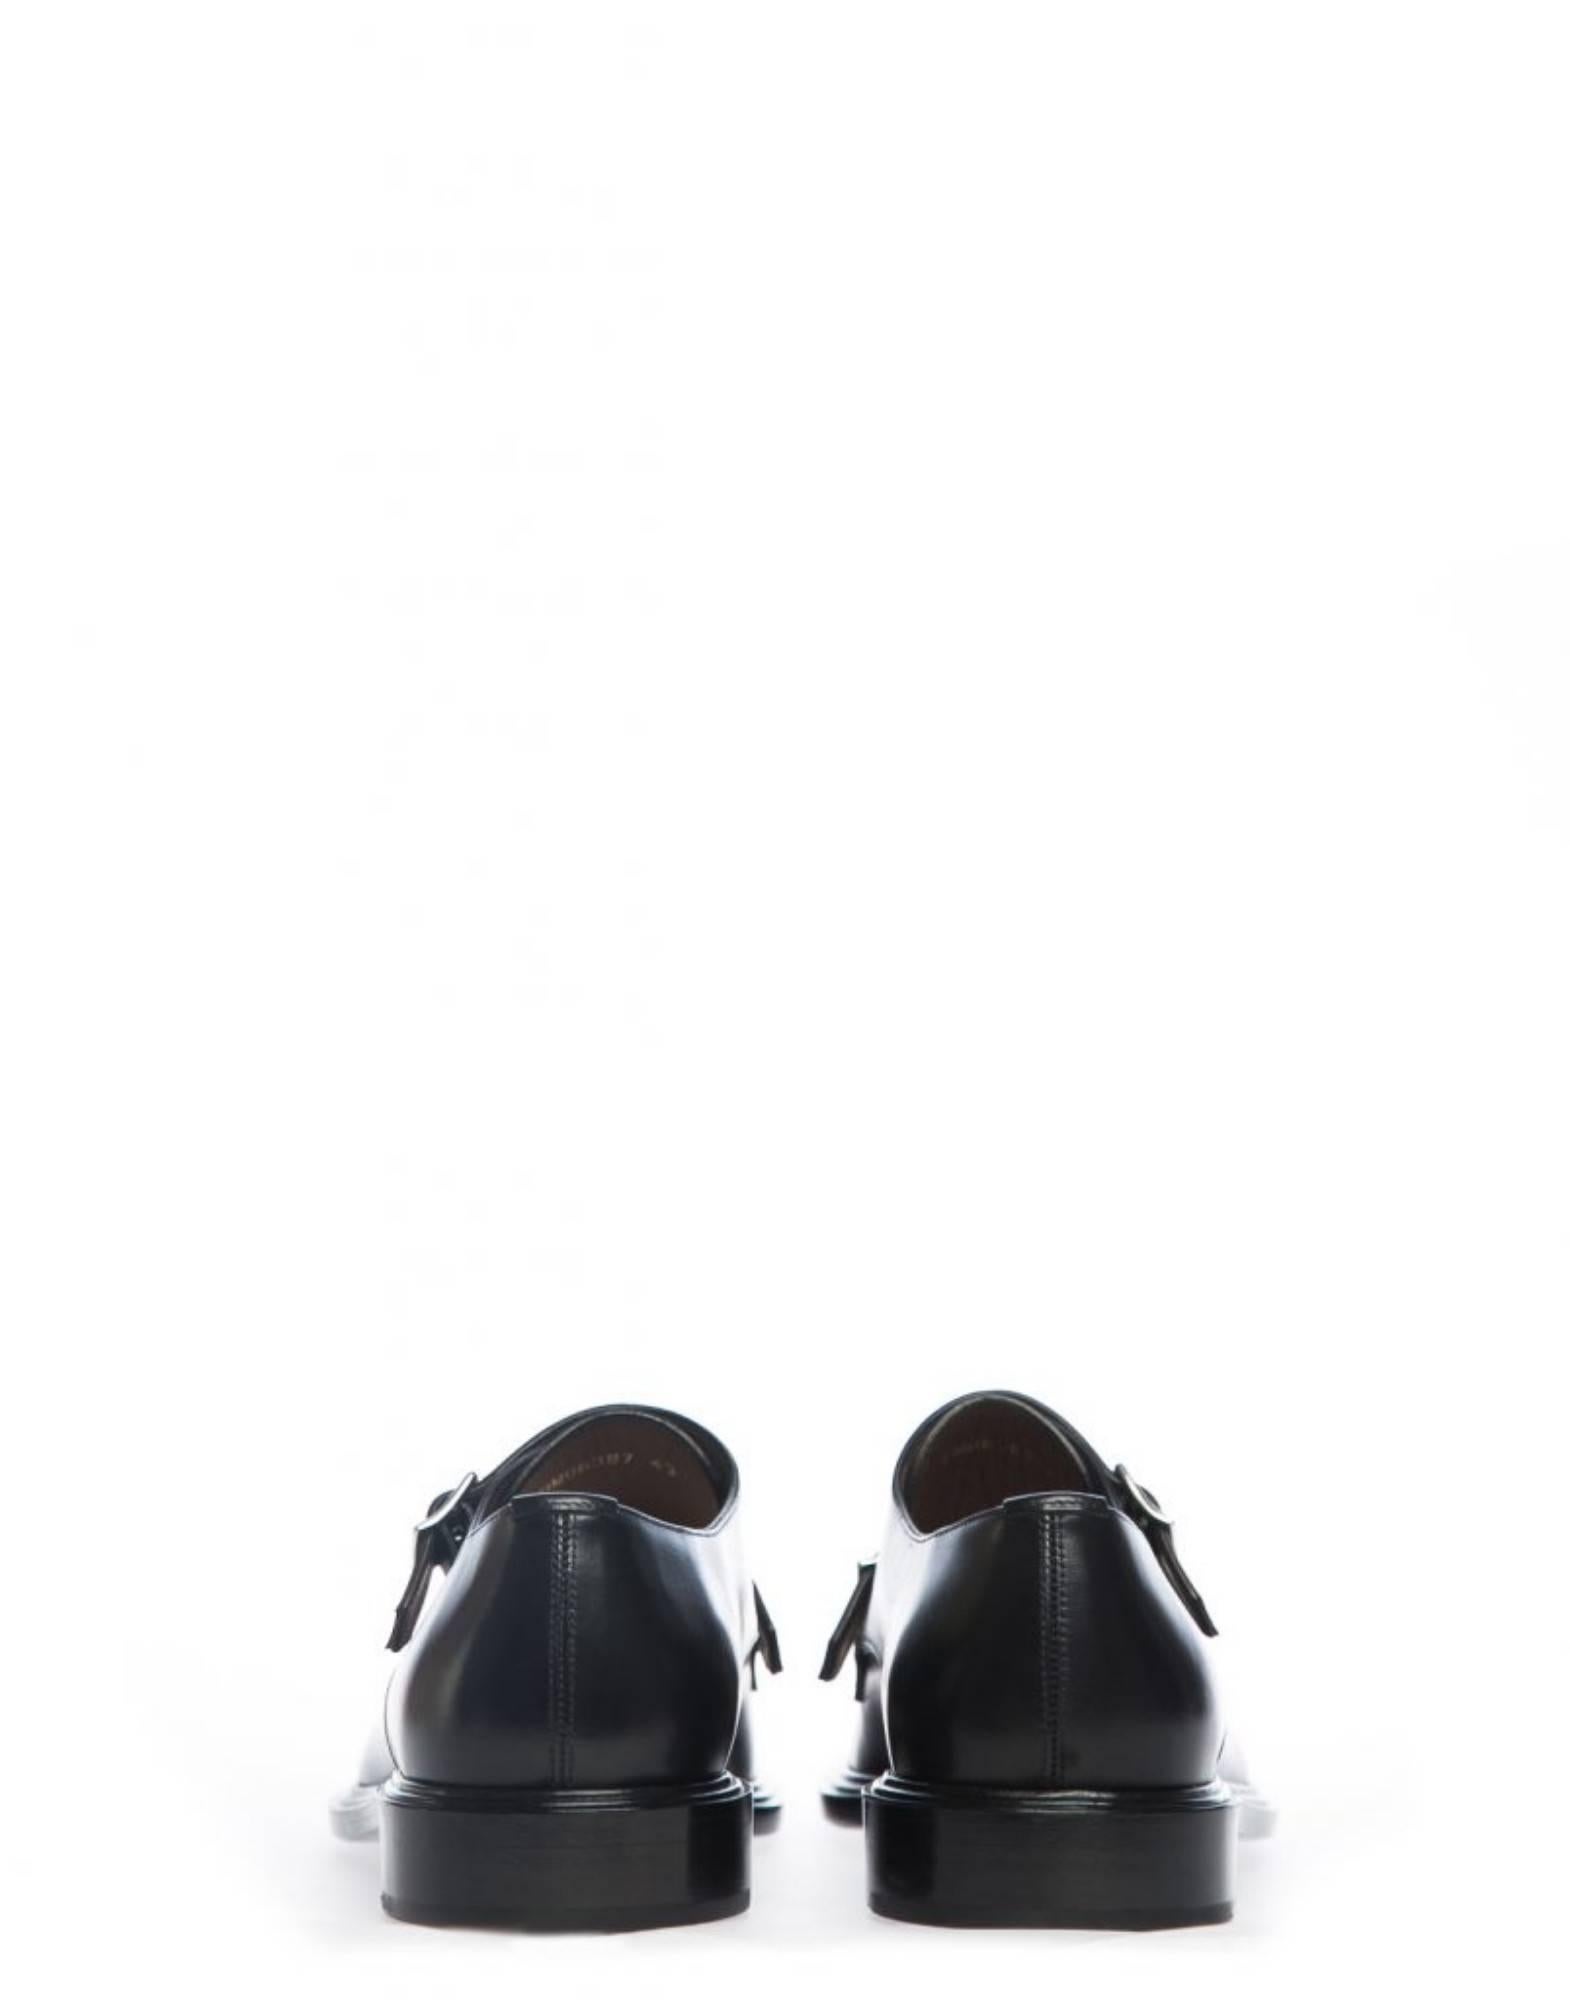 Black Givenchy Double Buckle Monk Strap Shoes (Size - 44) For Sale